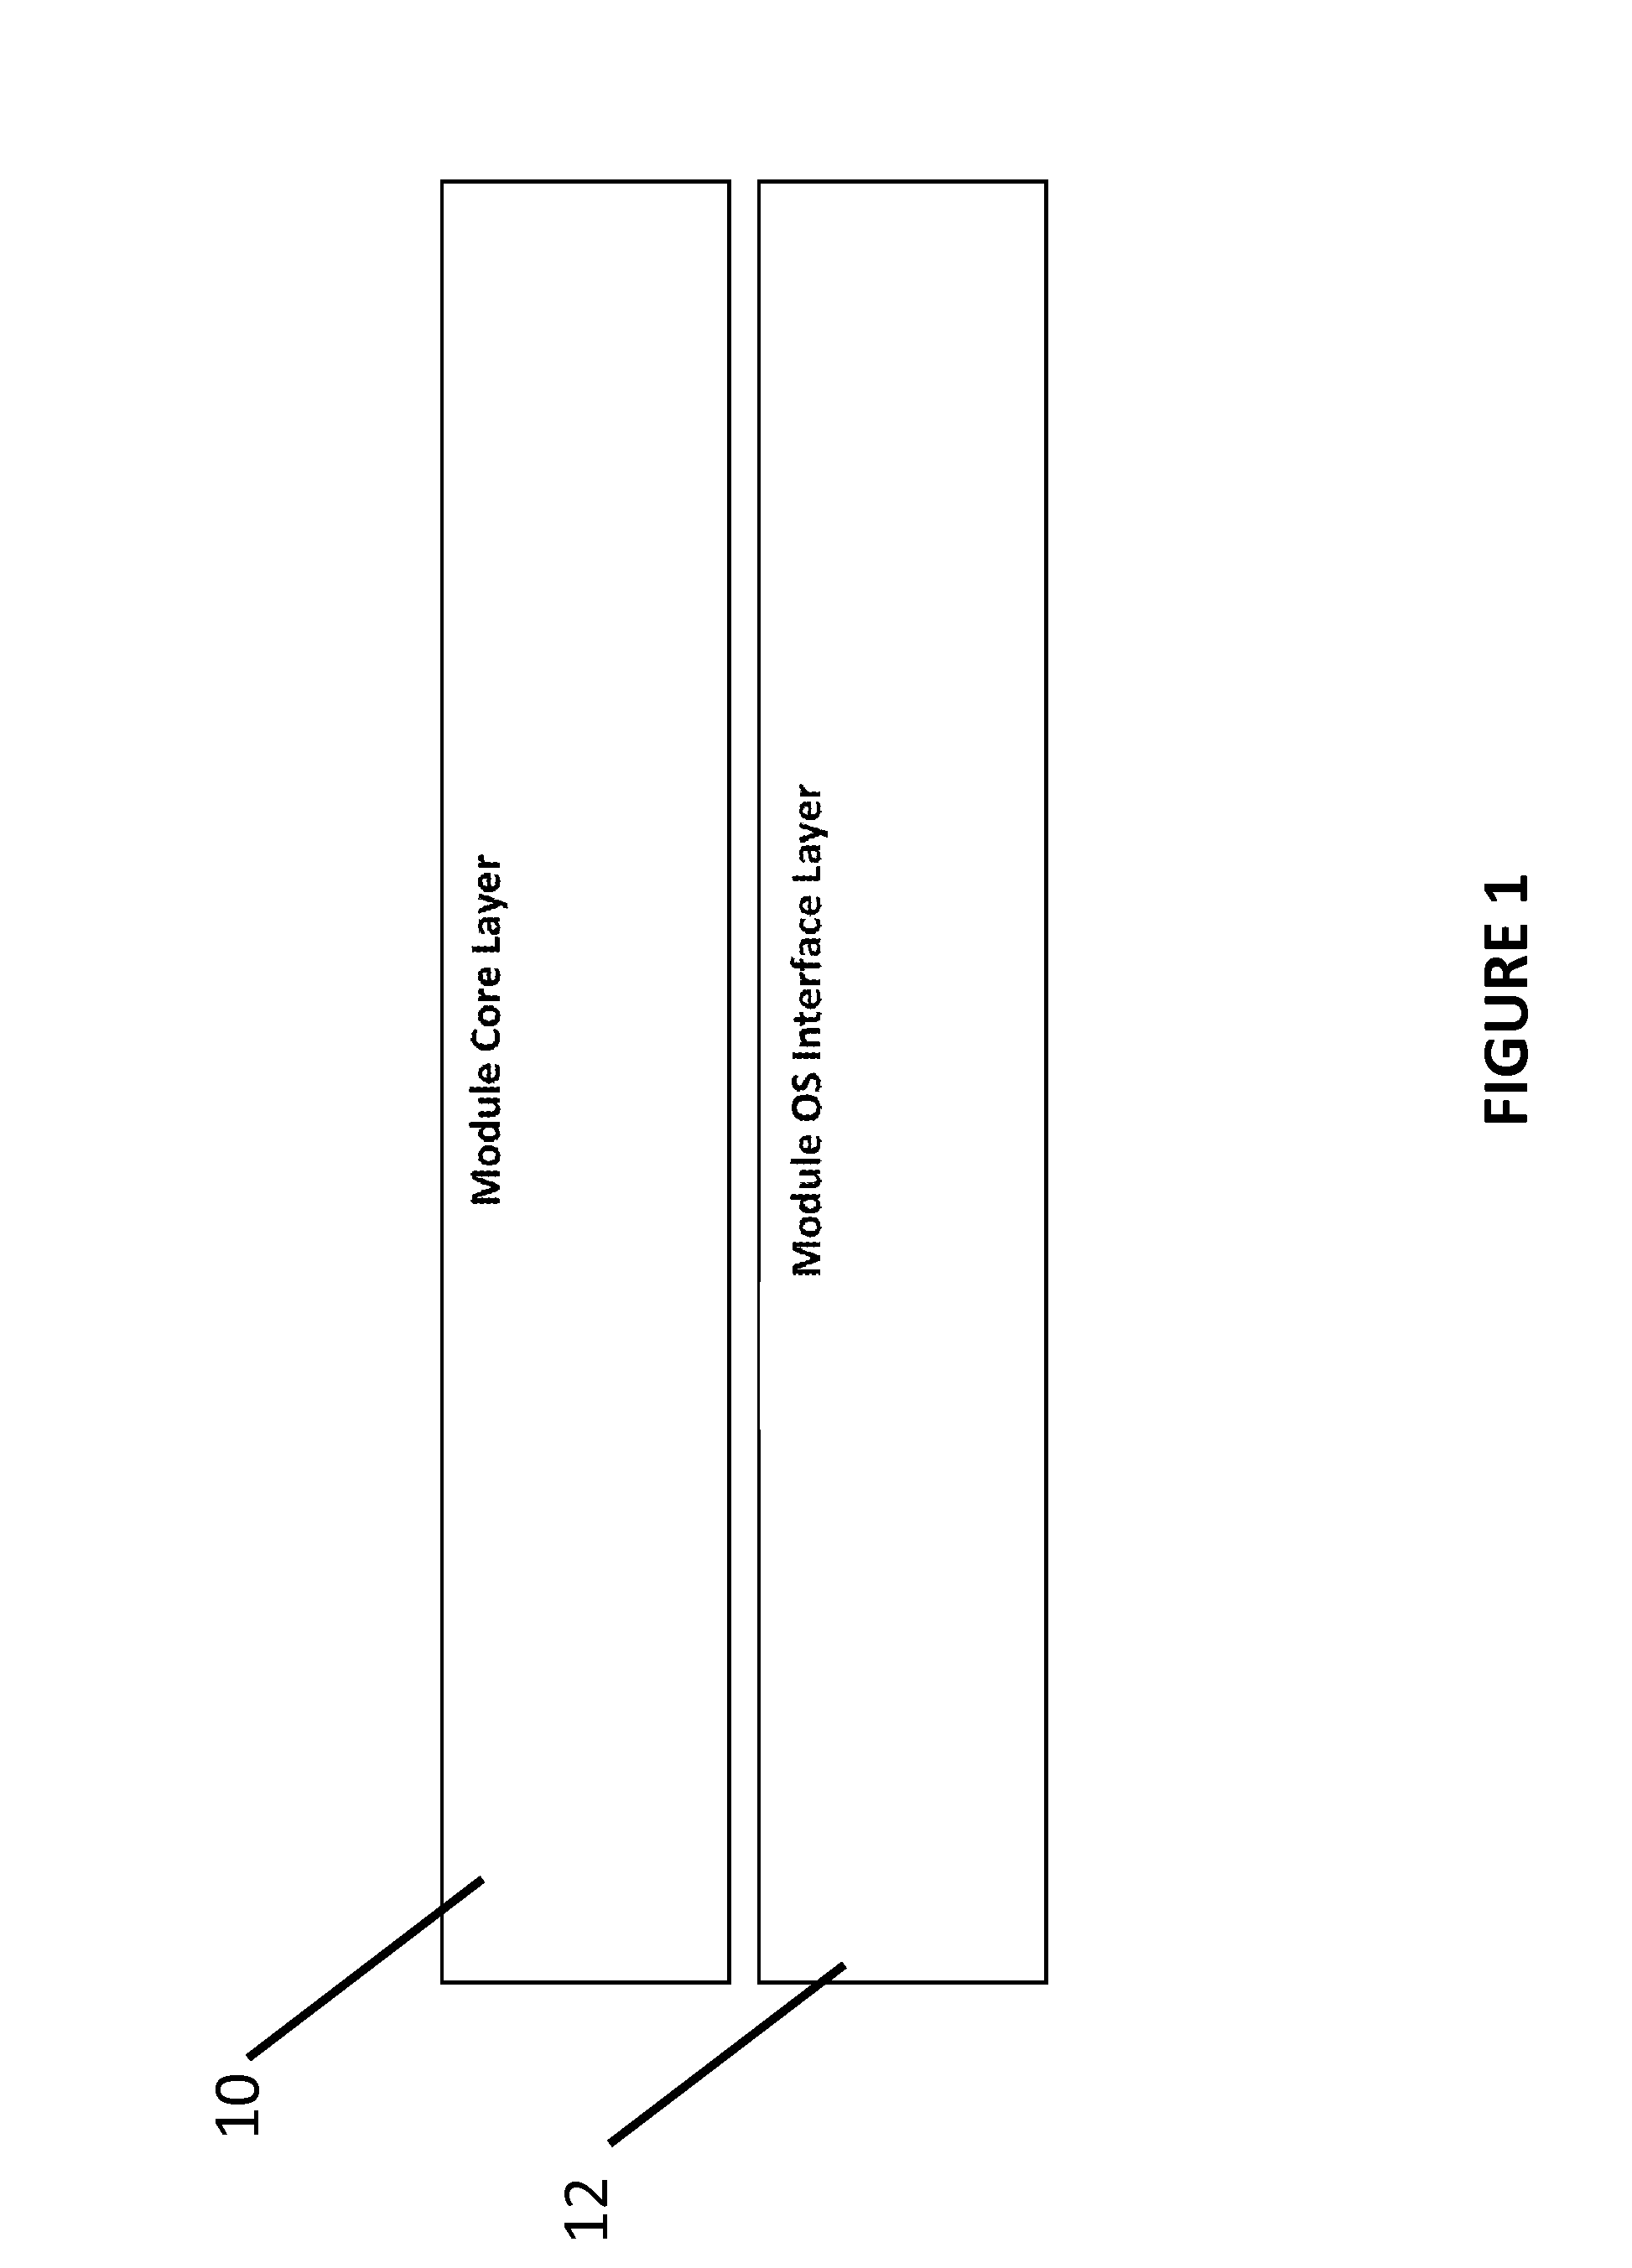 Modular device and data management system and gateway for a communications network